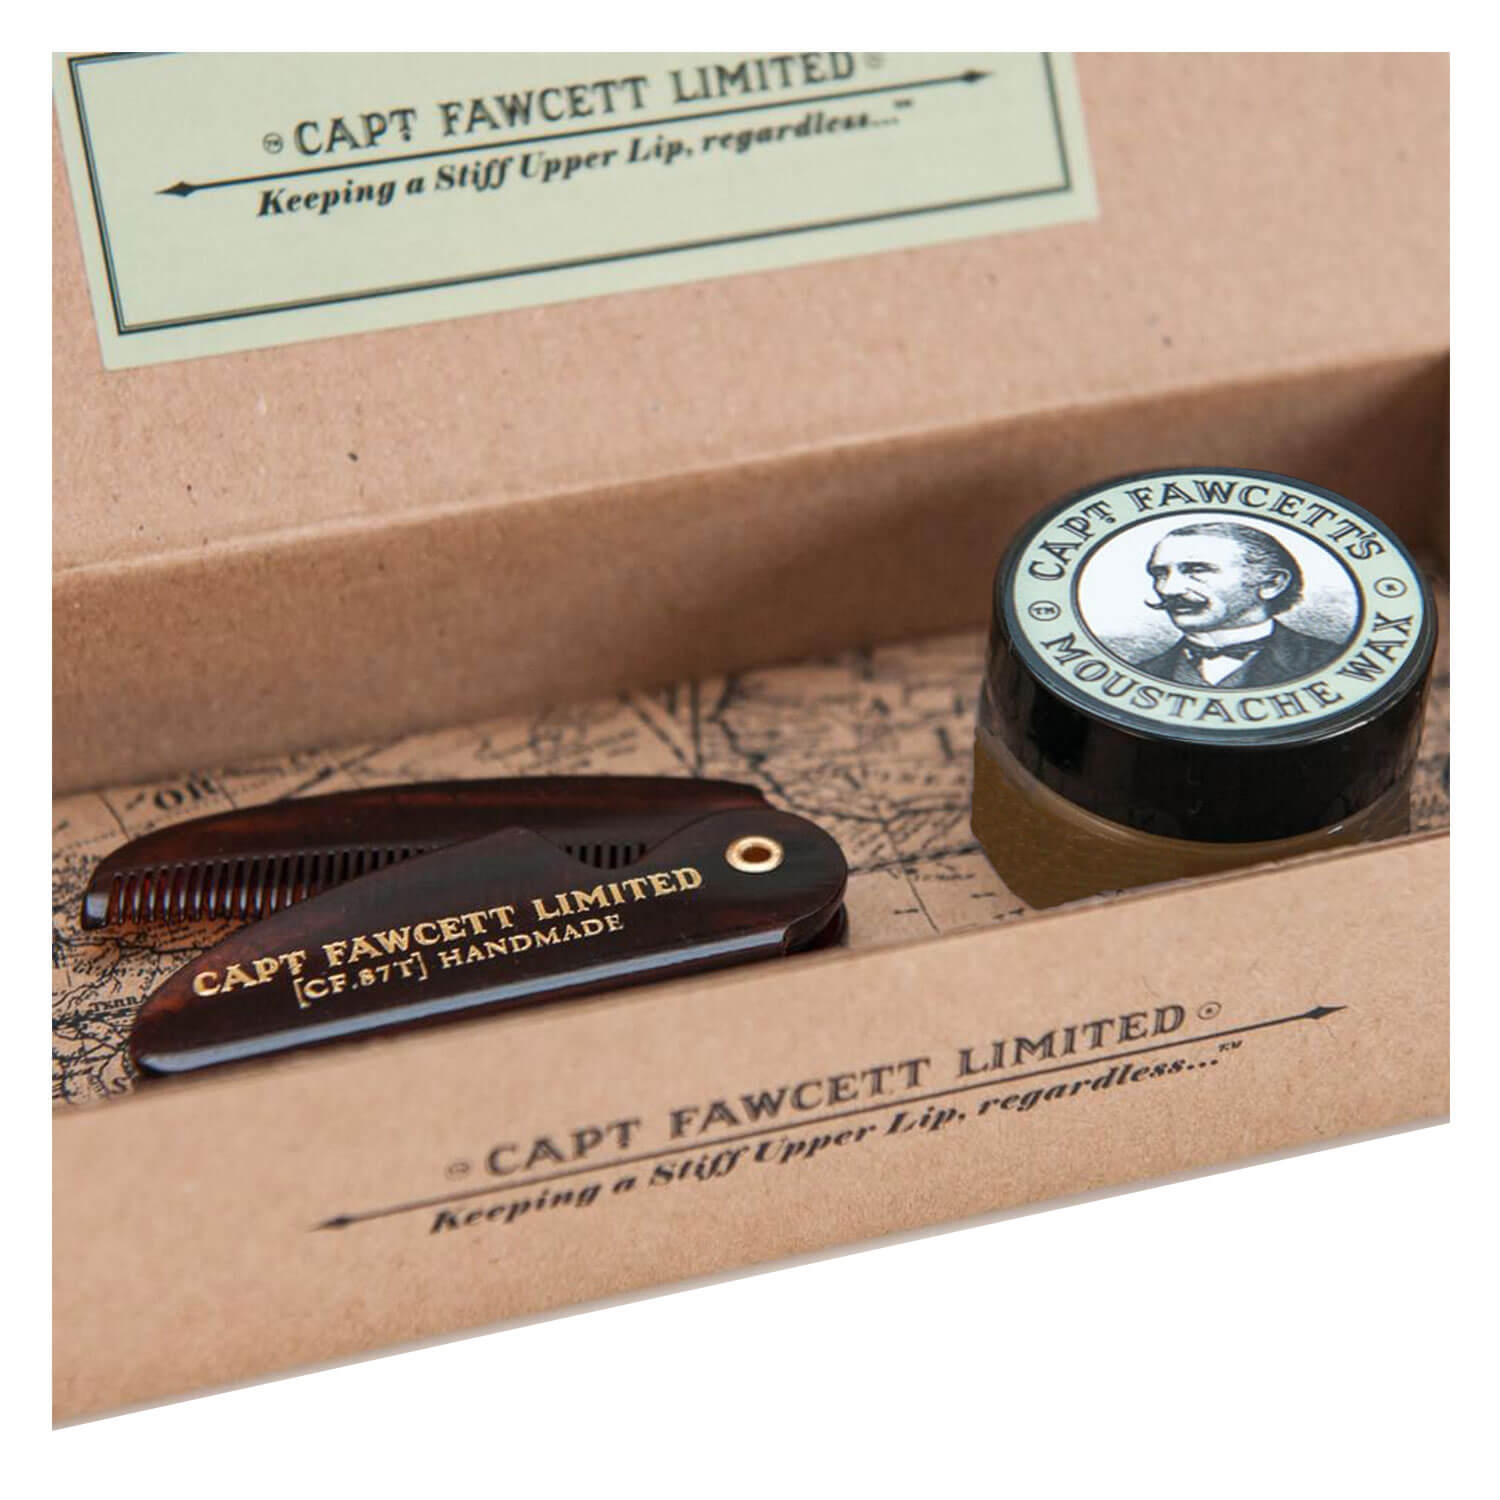 Product image from Capt. Fawcett Care - Ylang Ylang Moustache Wax & Folding Pocket Moustache Comb Kit